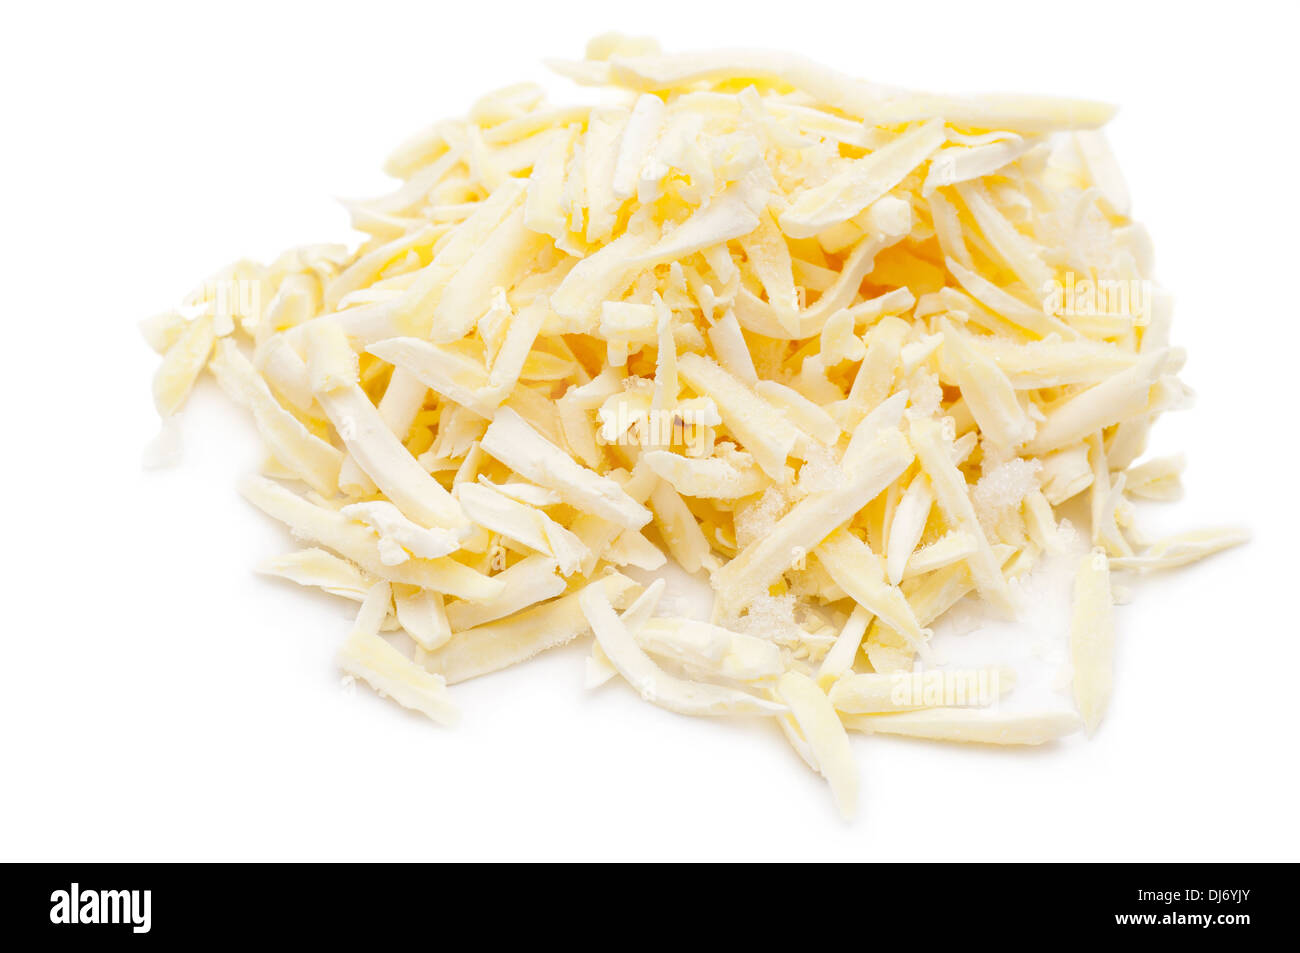 Frozen grated cheese on white background. Stock Photo